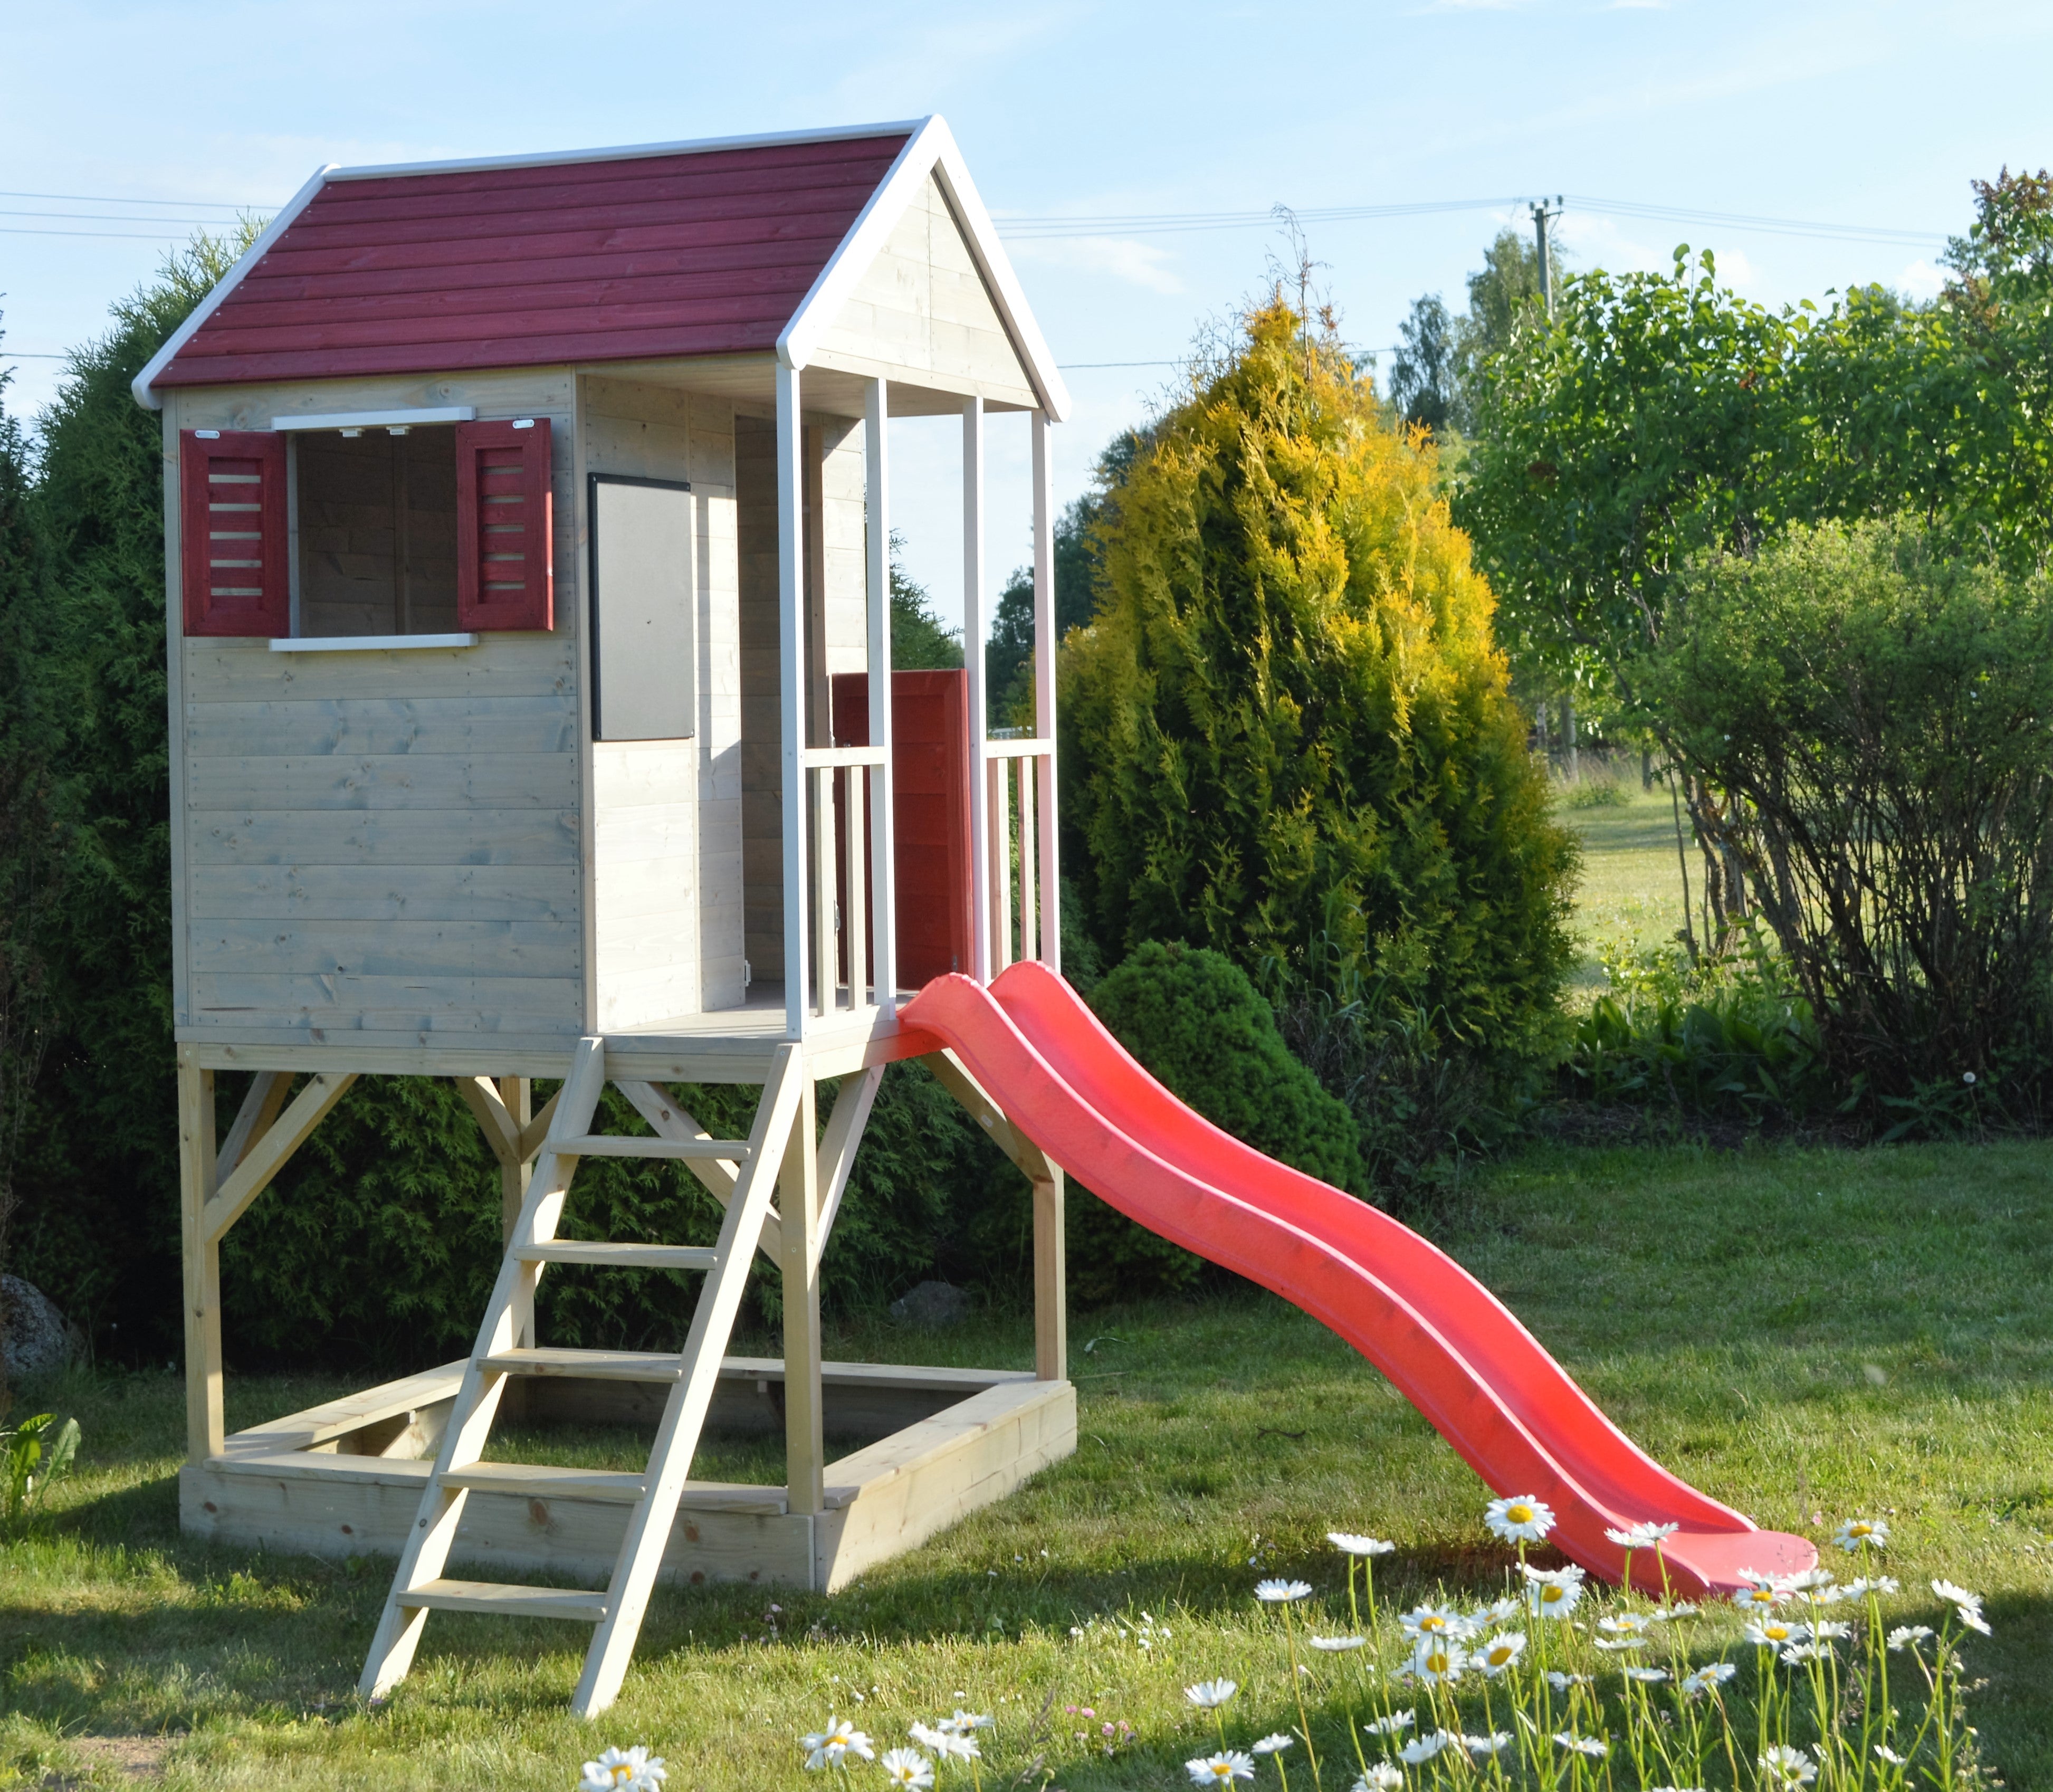 M7R Summer Adventure House with Platform and Slide